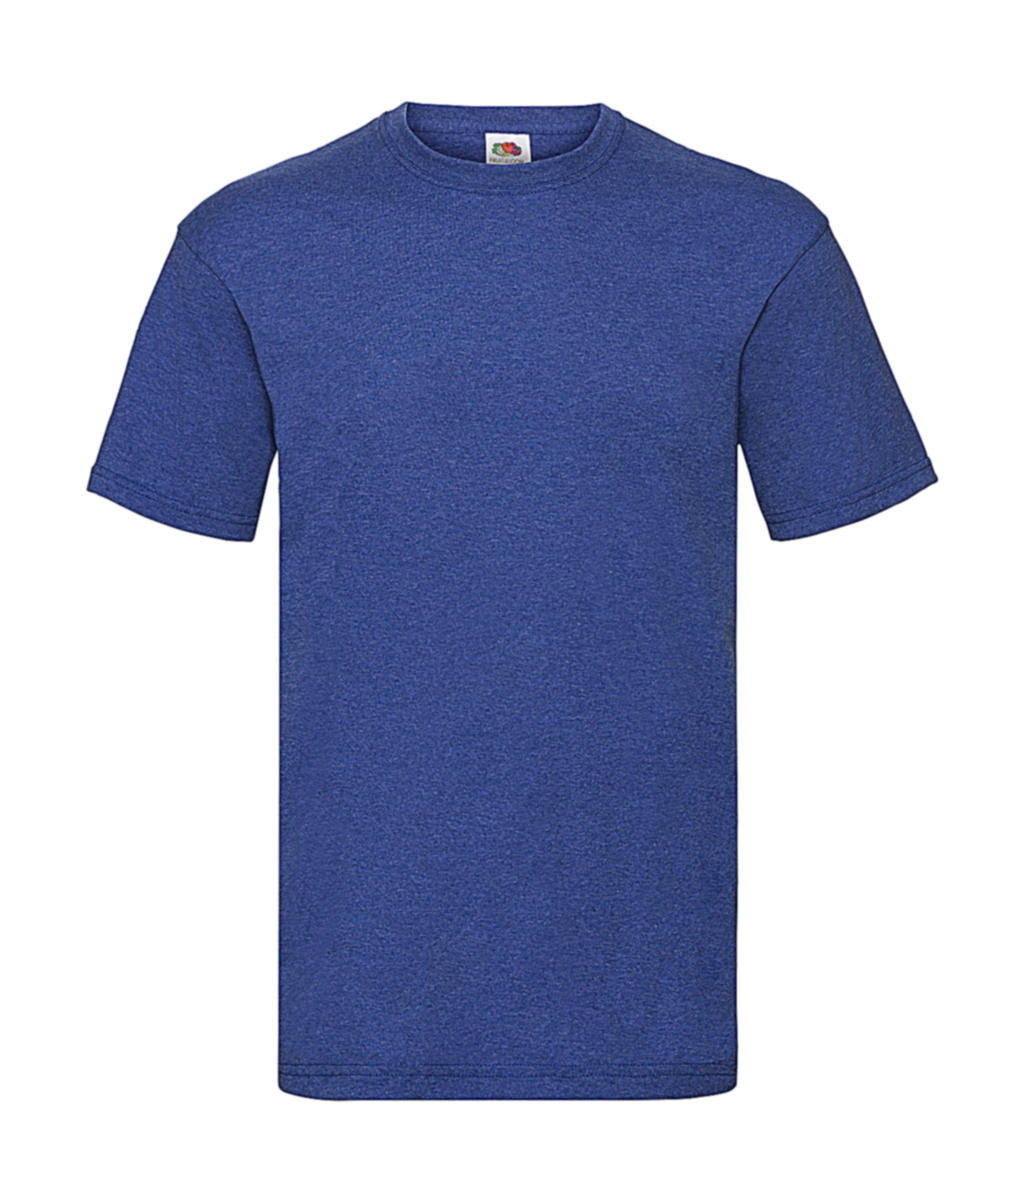  Valueweight Tee in Farbe Heather Royal